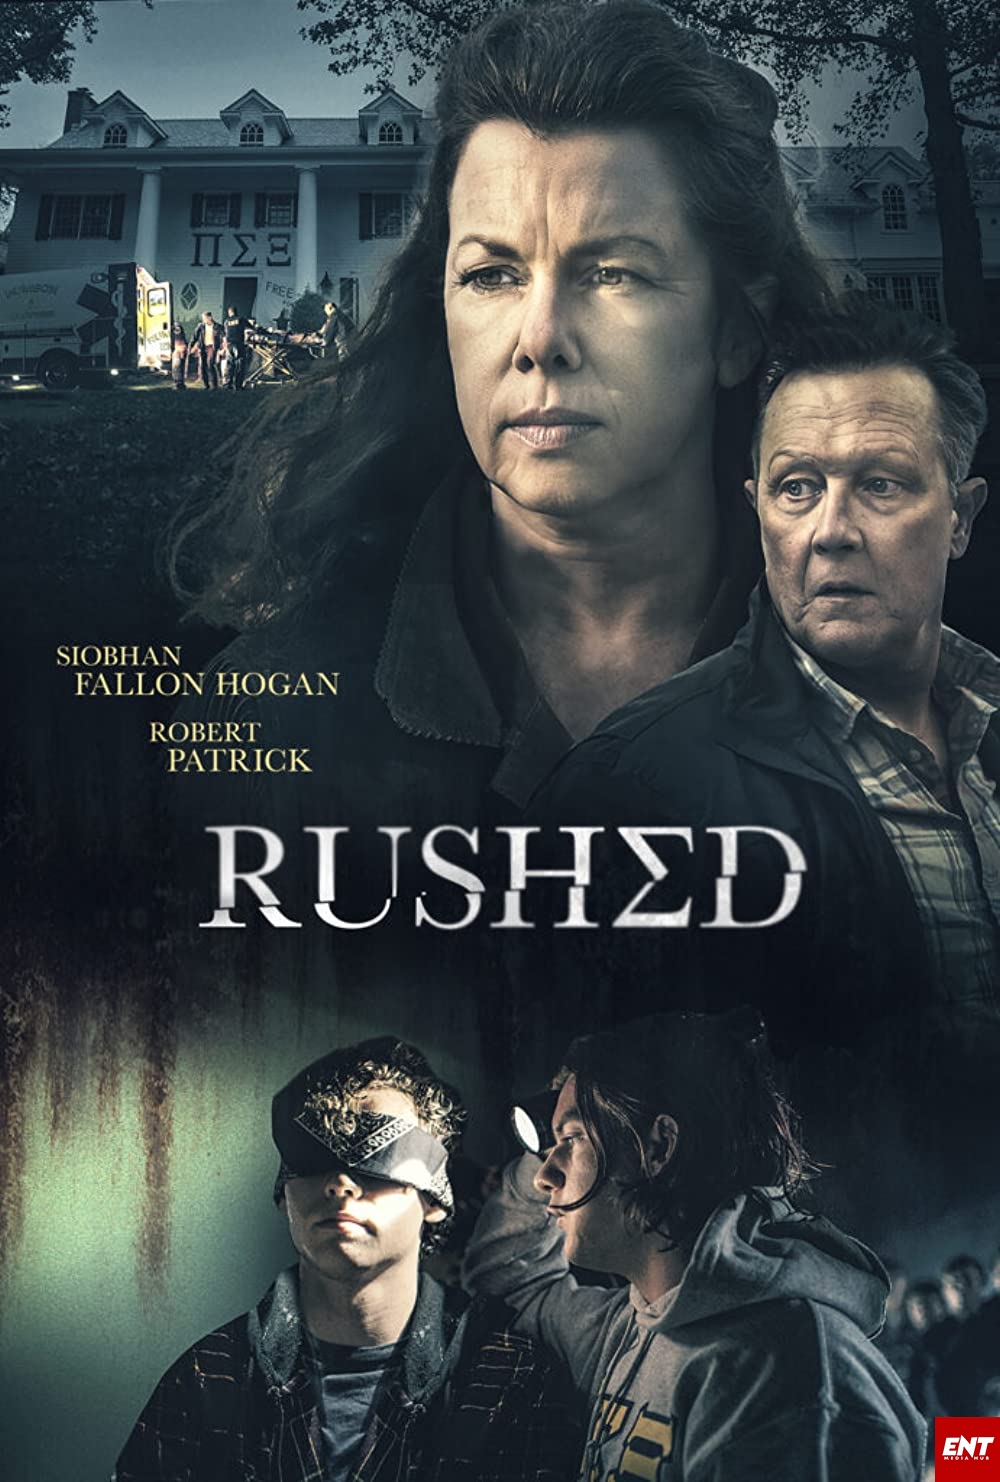 MOVIE : Rushed (2021)